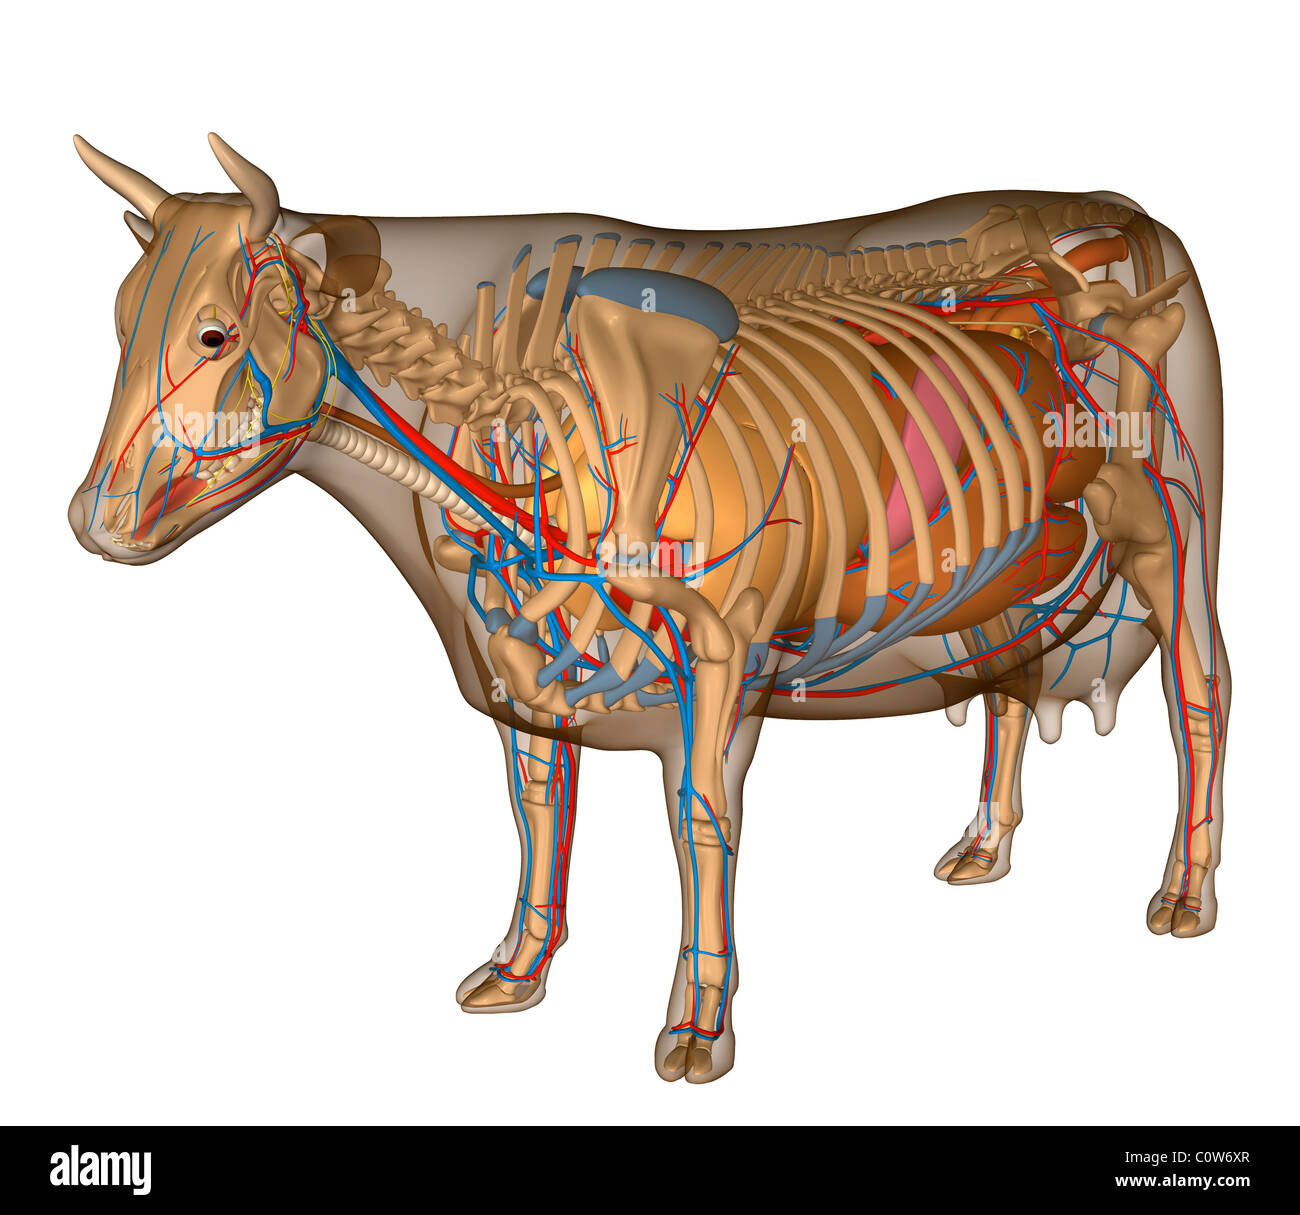 Anatomy of the cow organs Stock Photo - Alamy